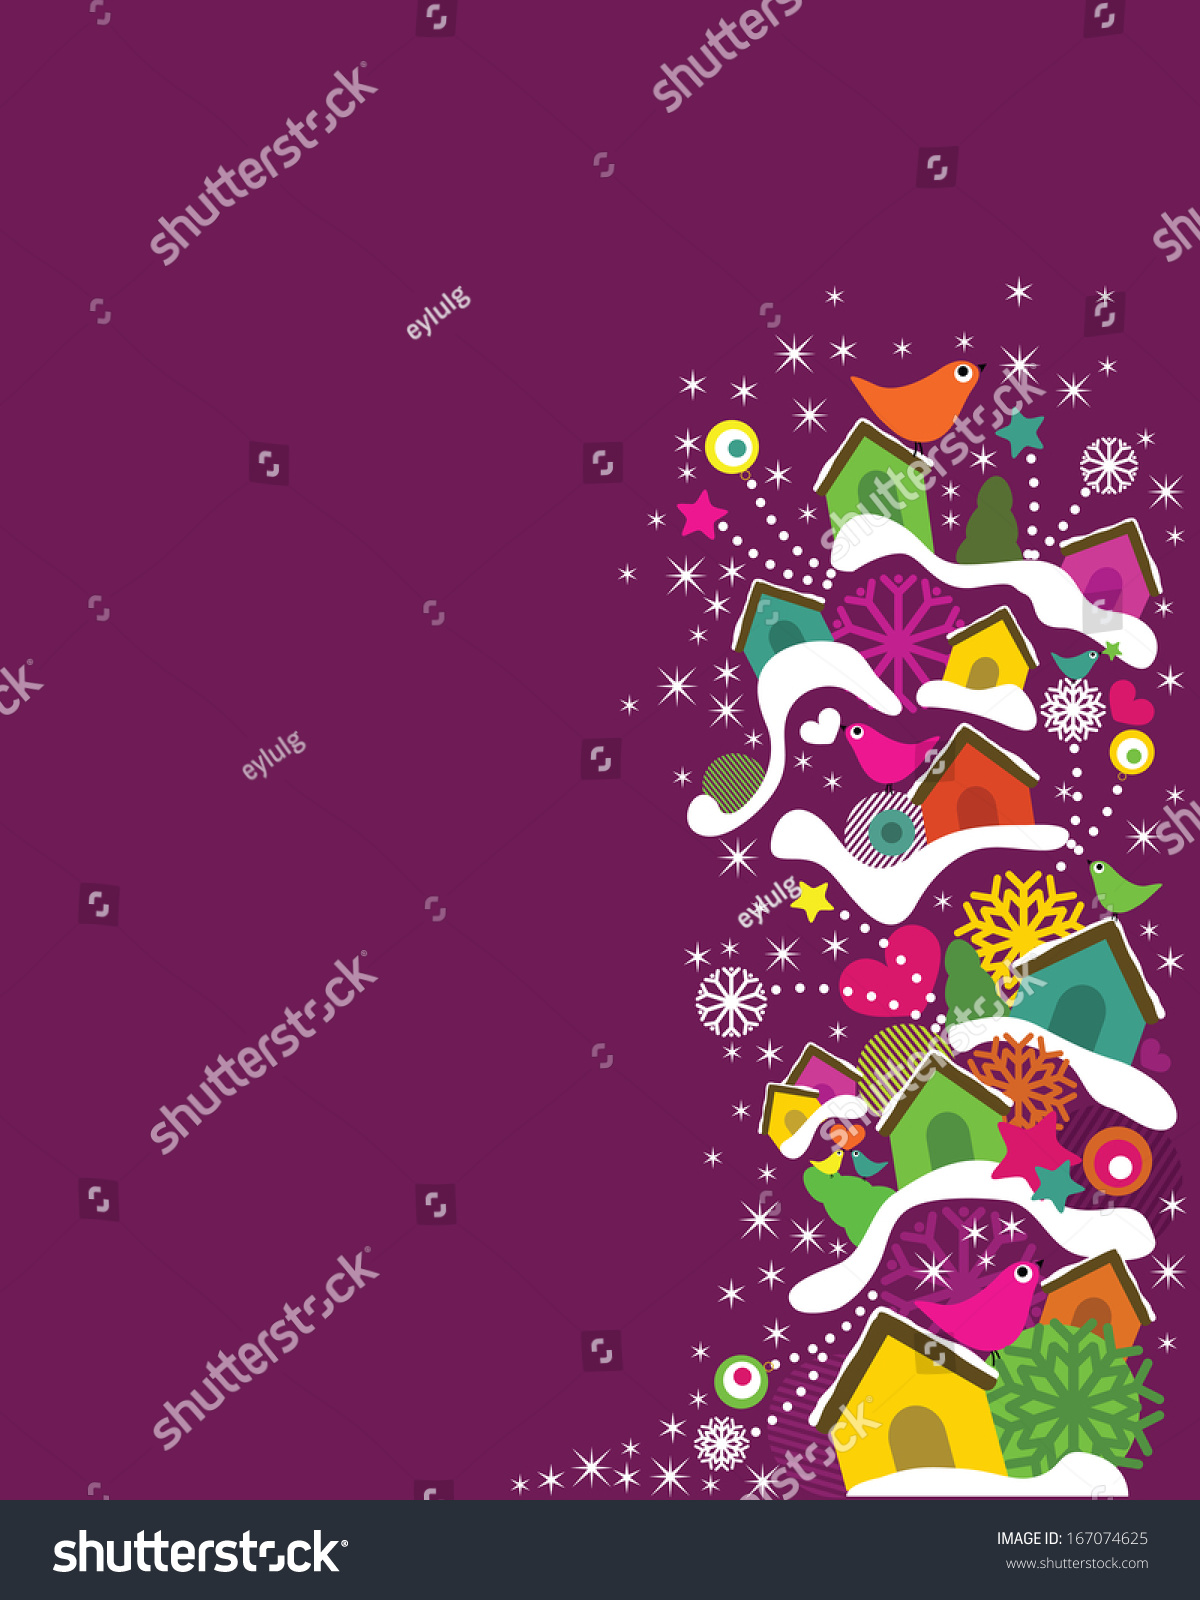 Download Edit Vectors Free Online - Colorful Vector Gift Background ...